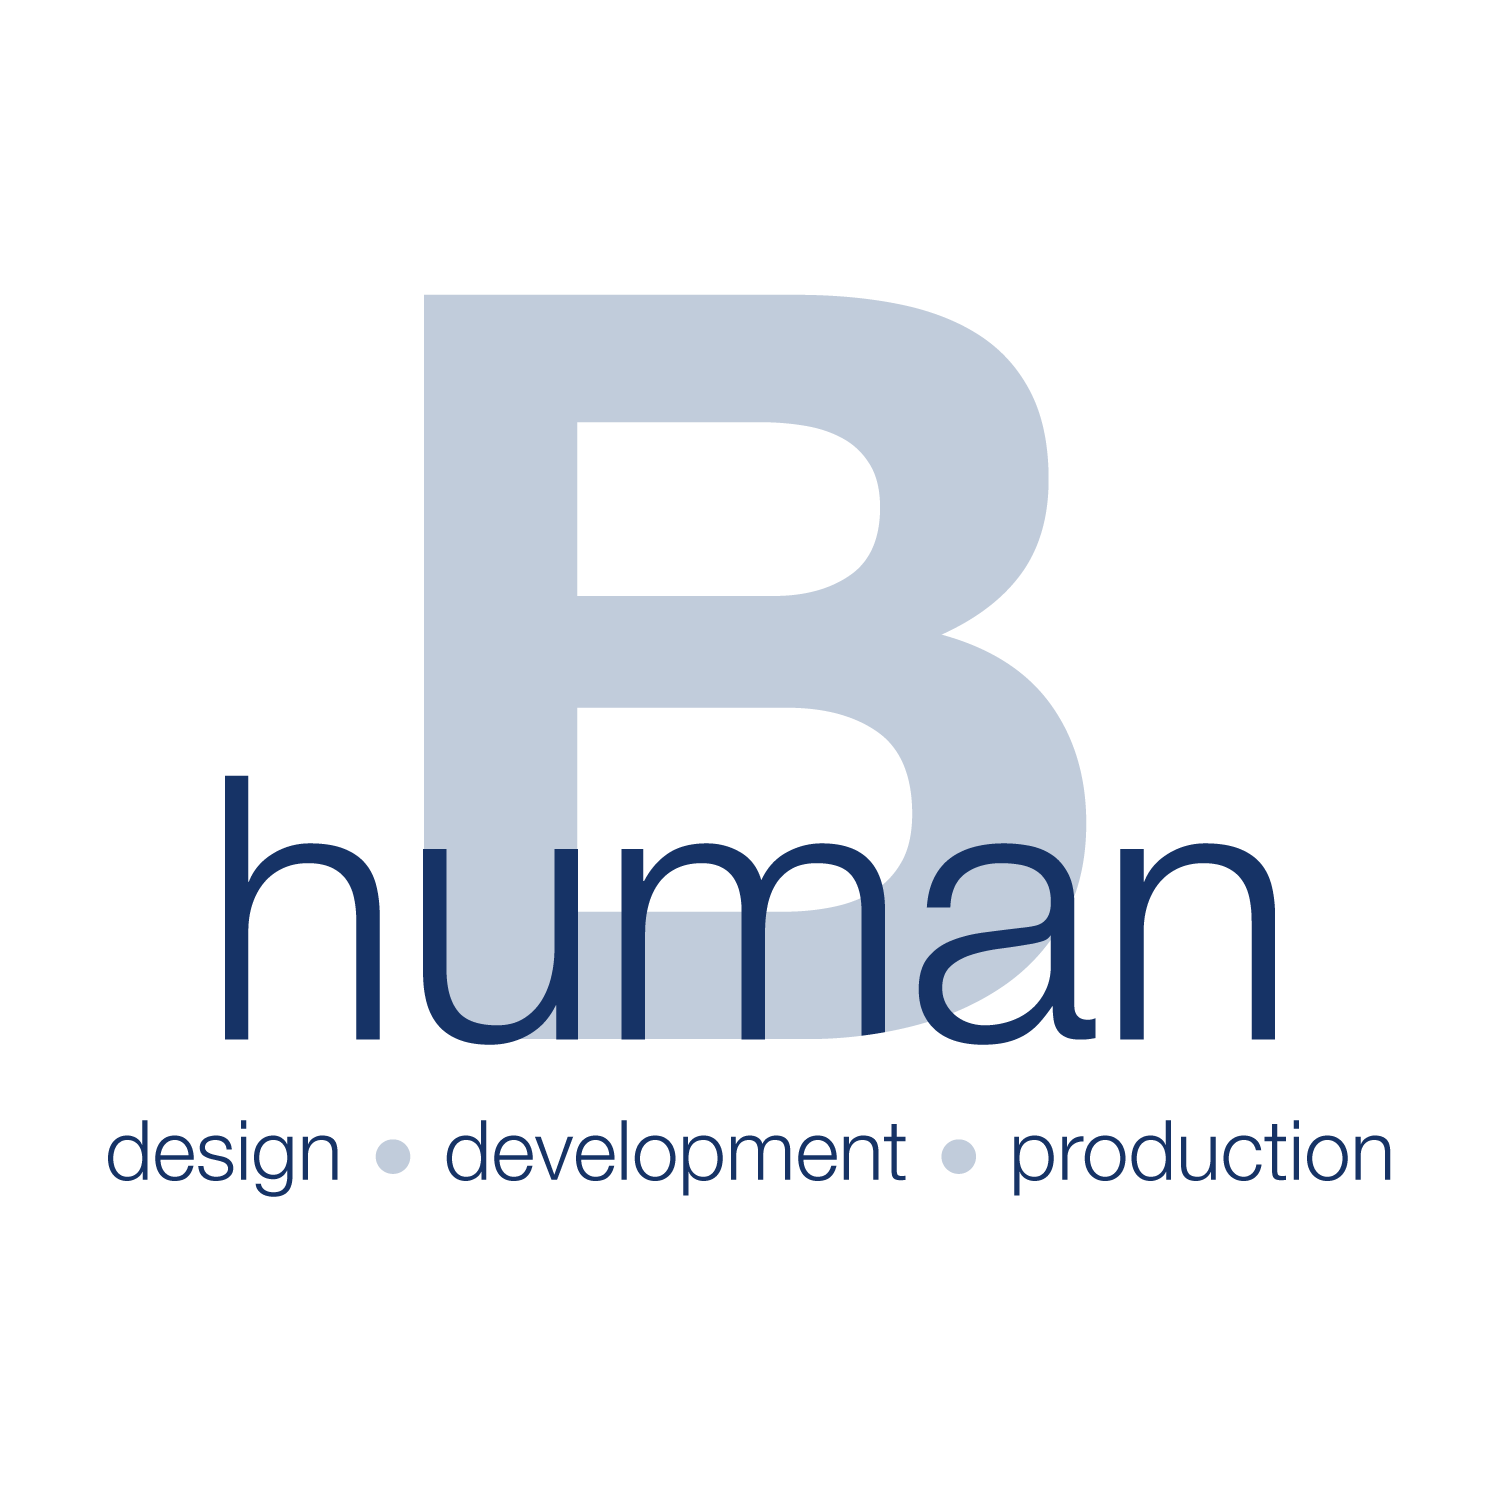 Apparel Manufacturing and Consulting - Human B